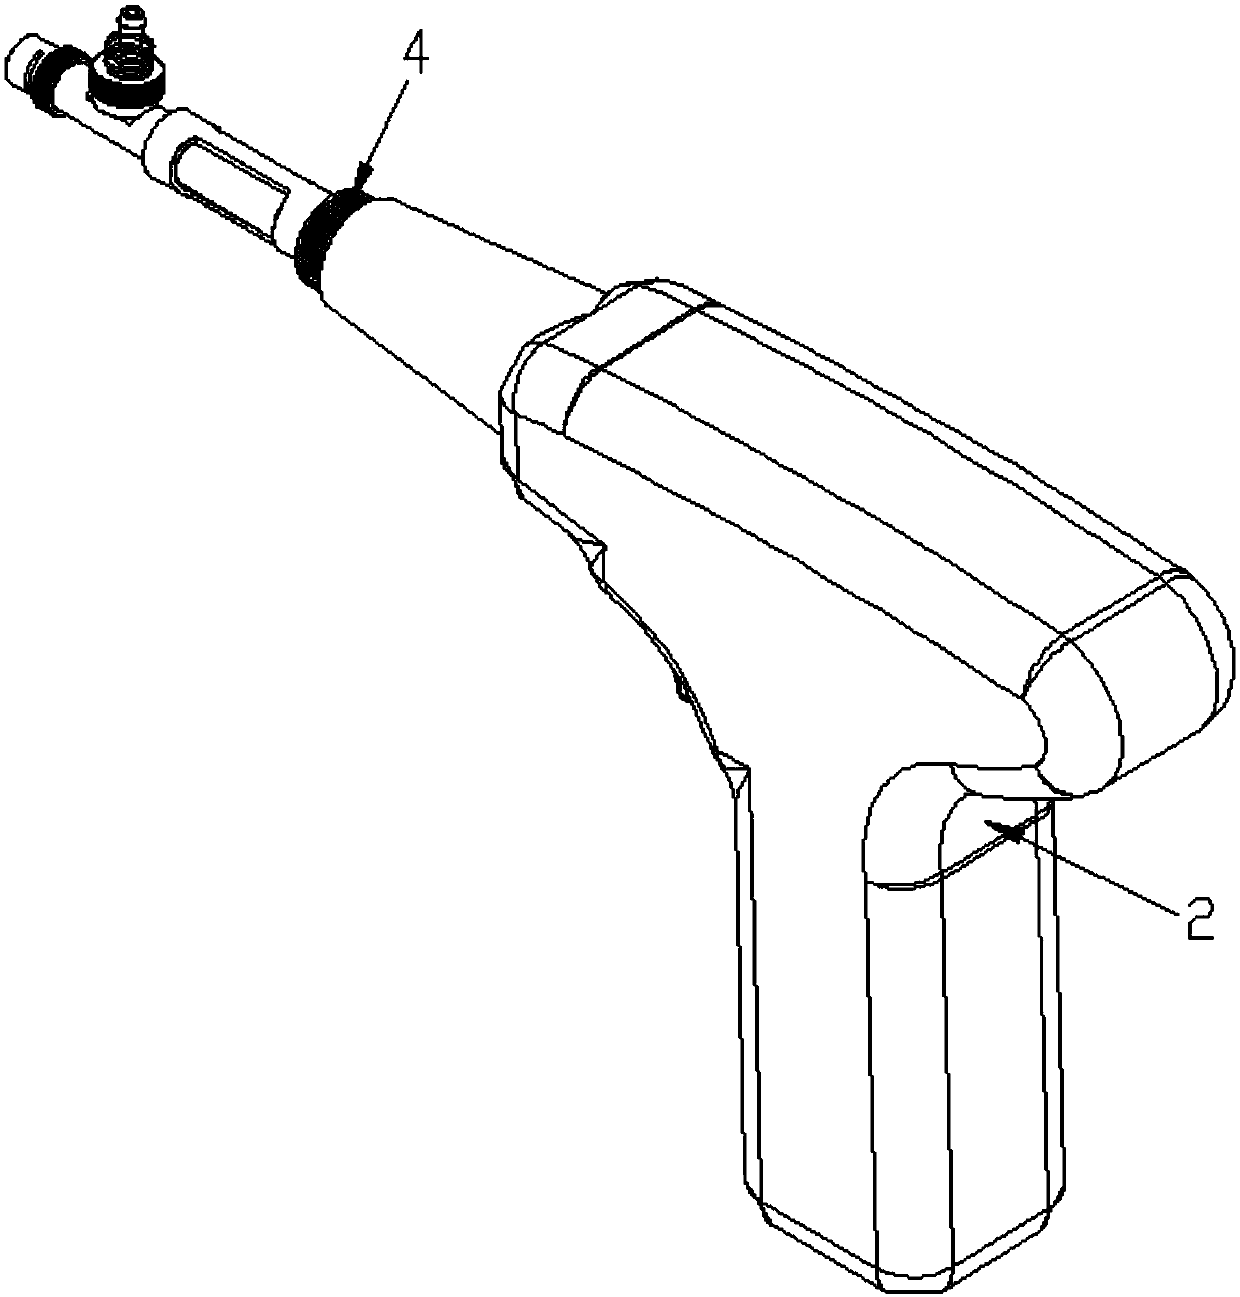 Electric or pneumatic continuous syringe